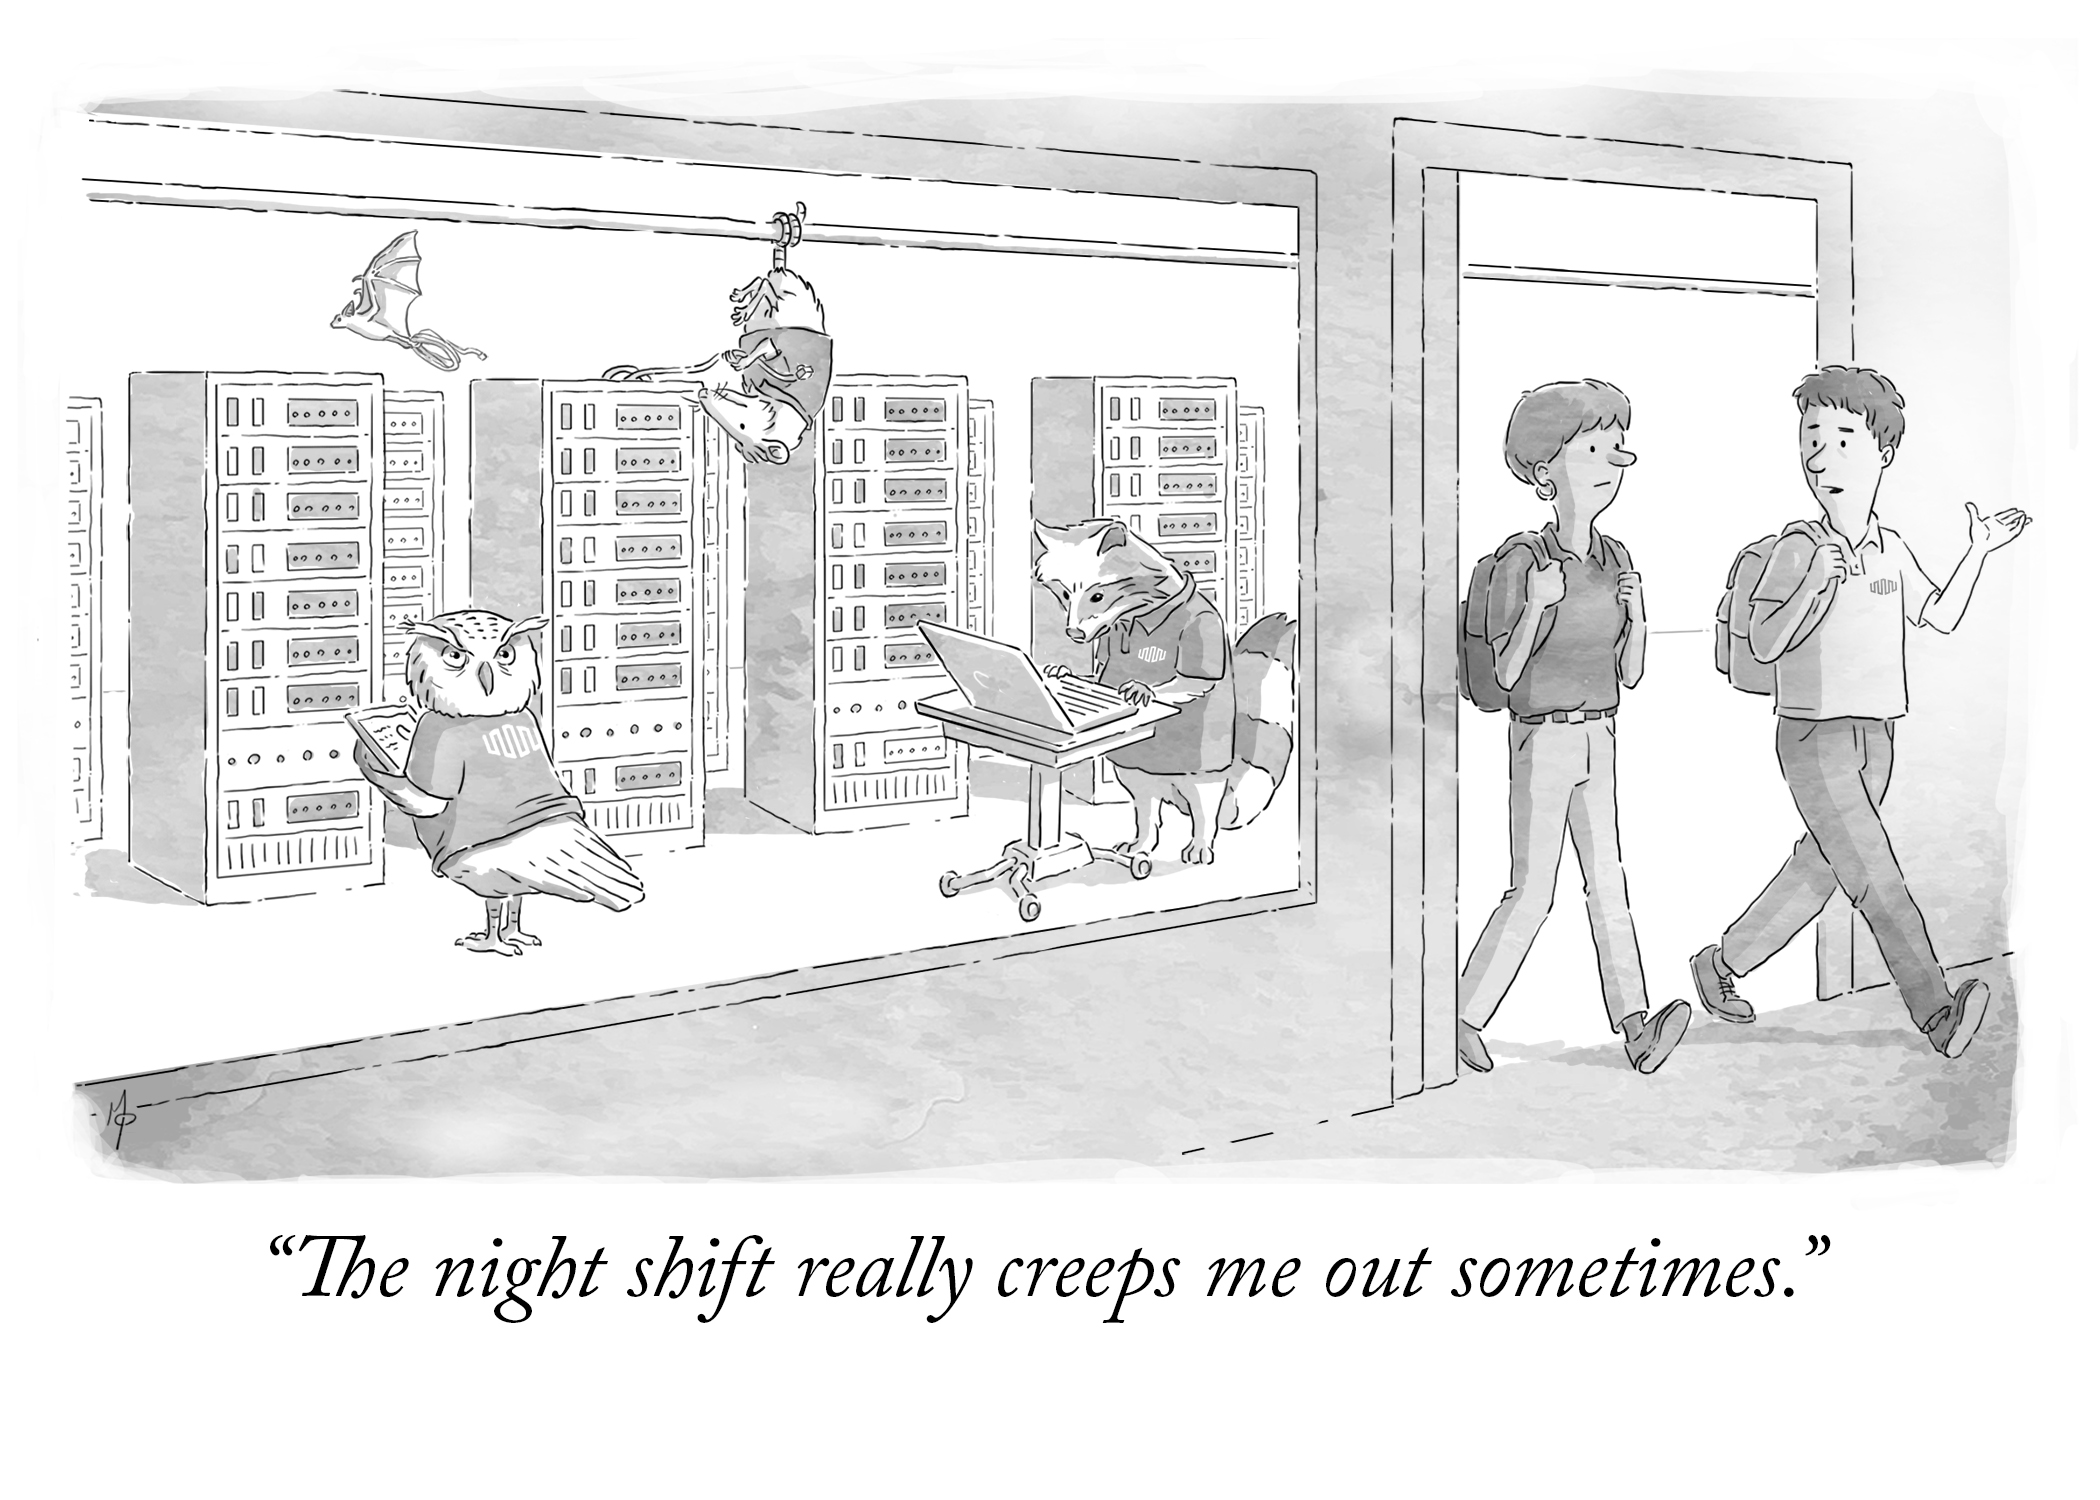 New Yorker style illustration. Two people are having a conversation on their way out of a server room - which is full of night time animals working for Equinix. The caption reads: The night shift really creeps me out sometimes.